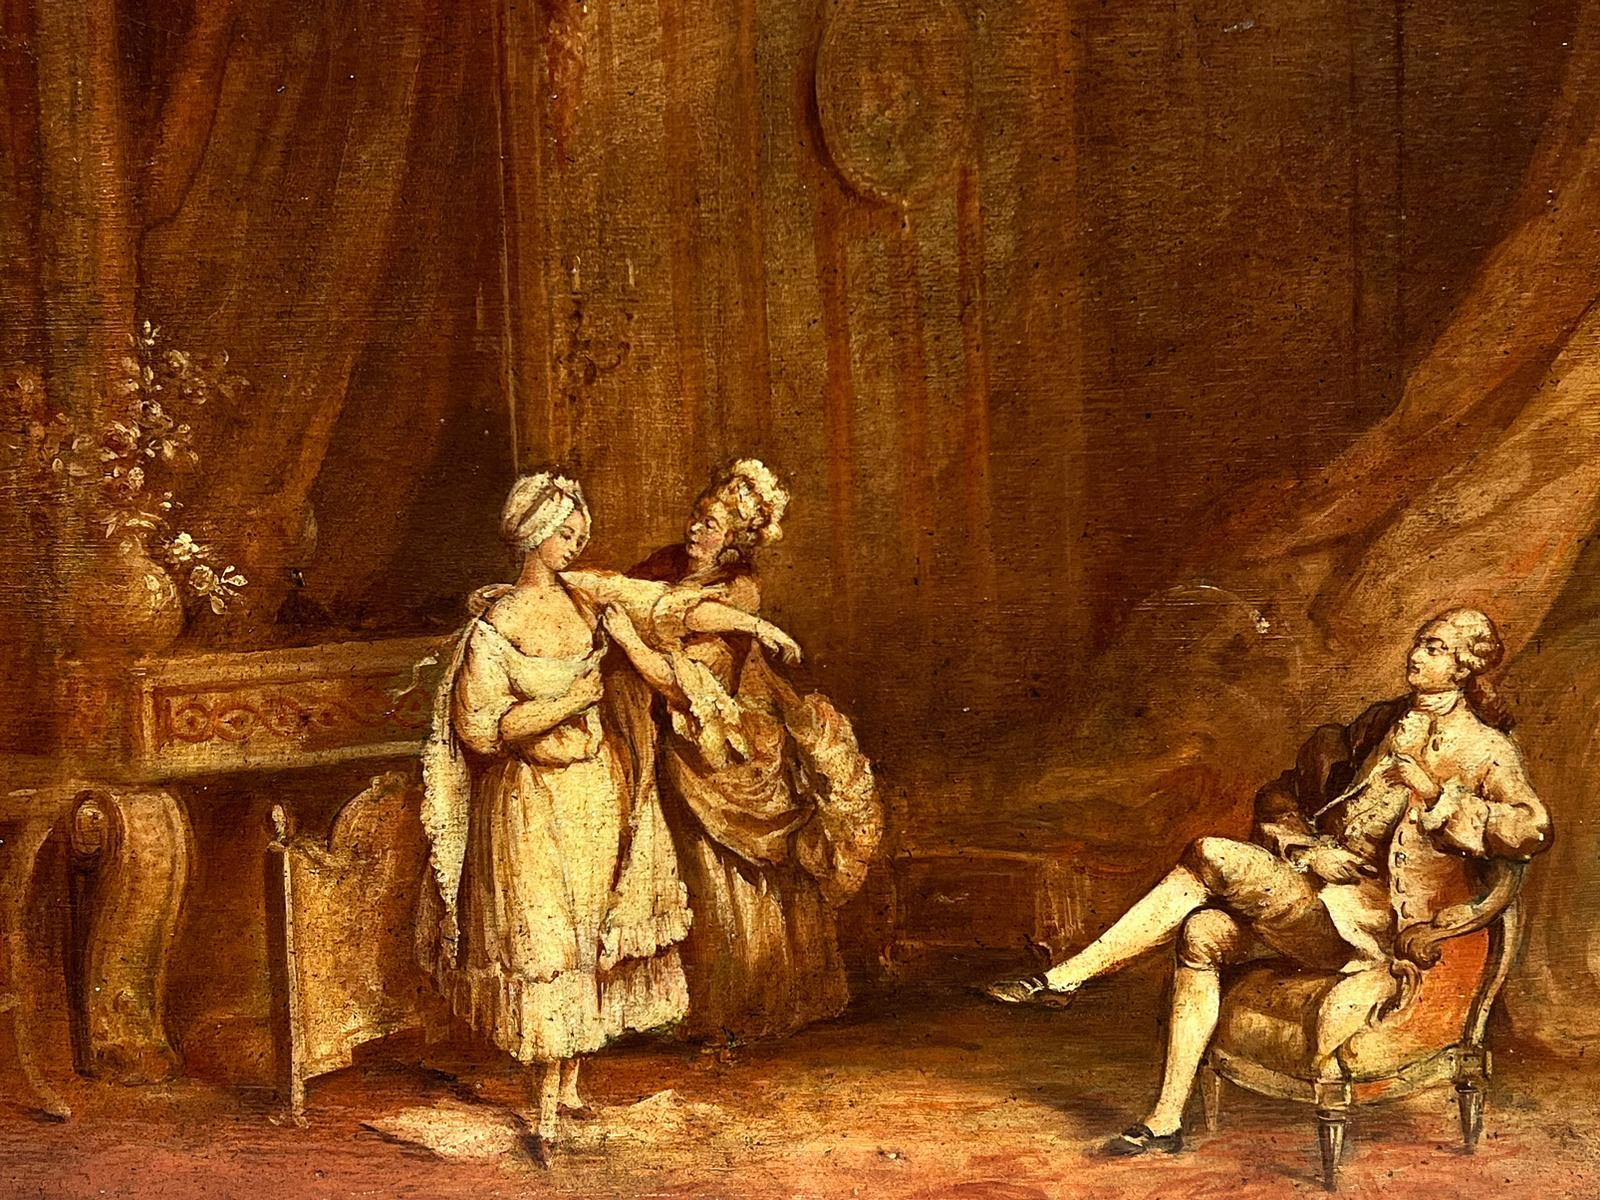 Trying on the Latest Dress
French School, circa 1800
oil painting on canvas, unframed
canvas: 19 x 24 inches
the painting is in overall very good and sound condition
provenance: private collection, England